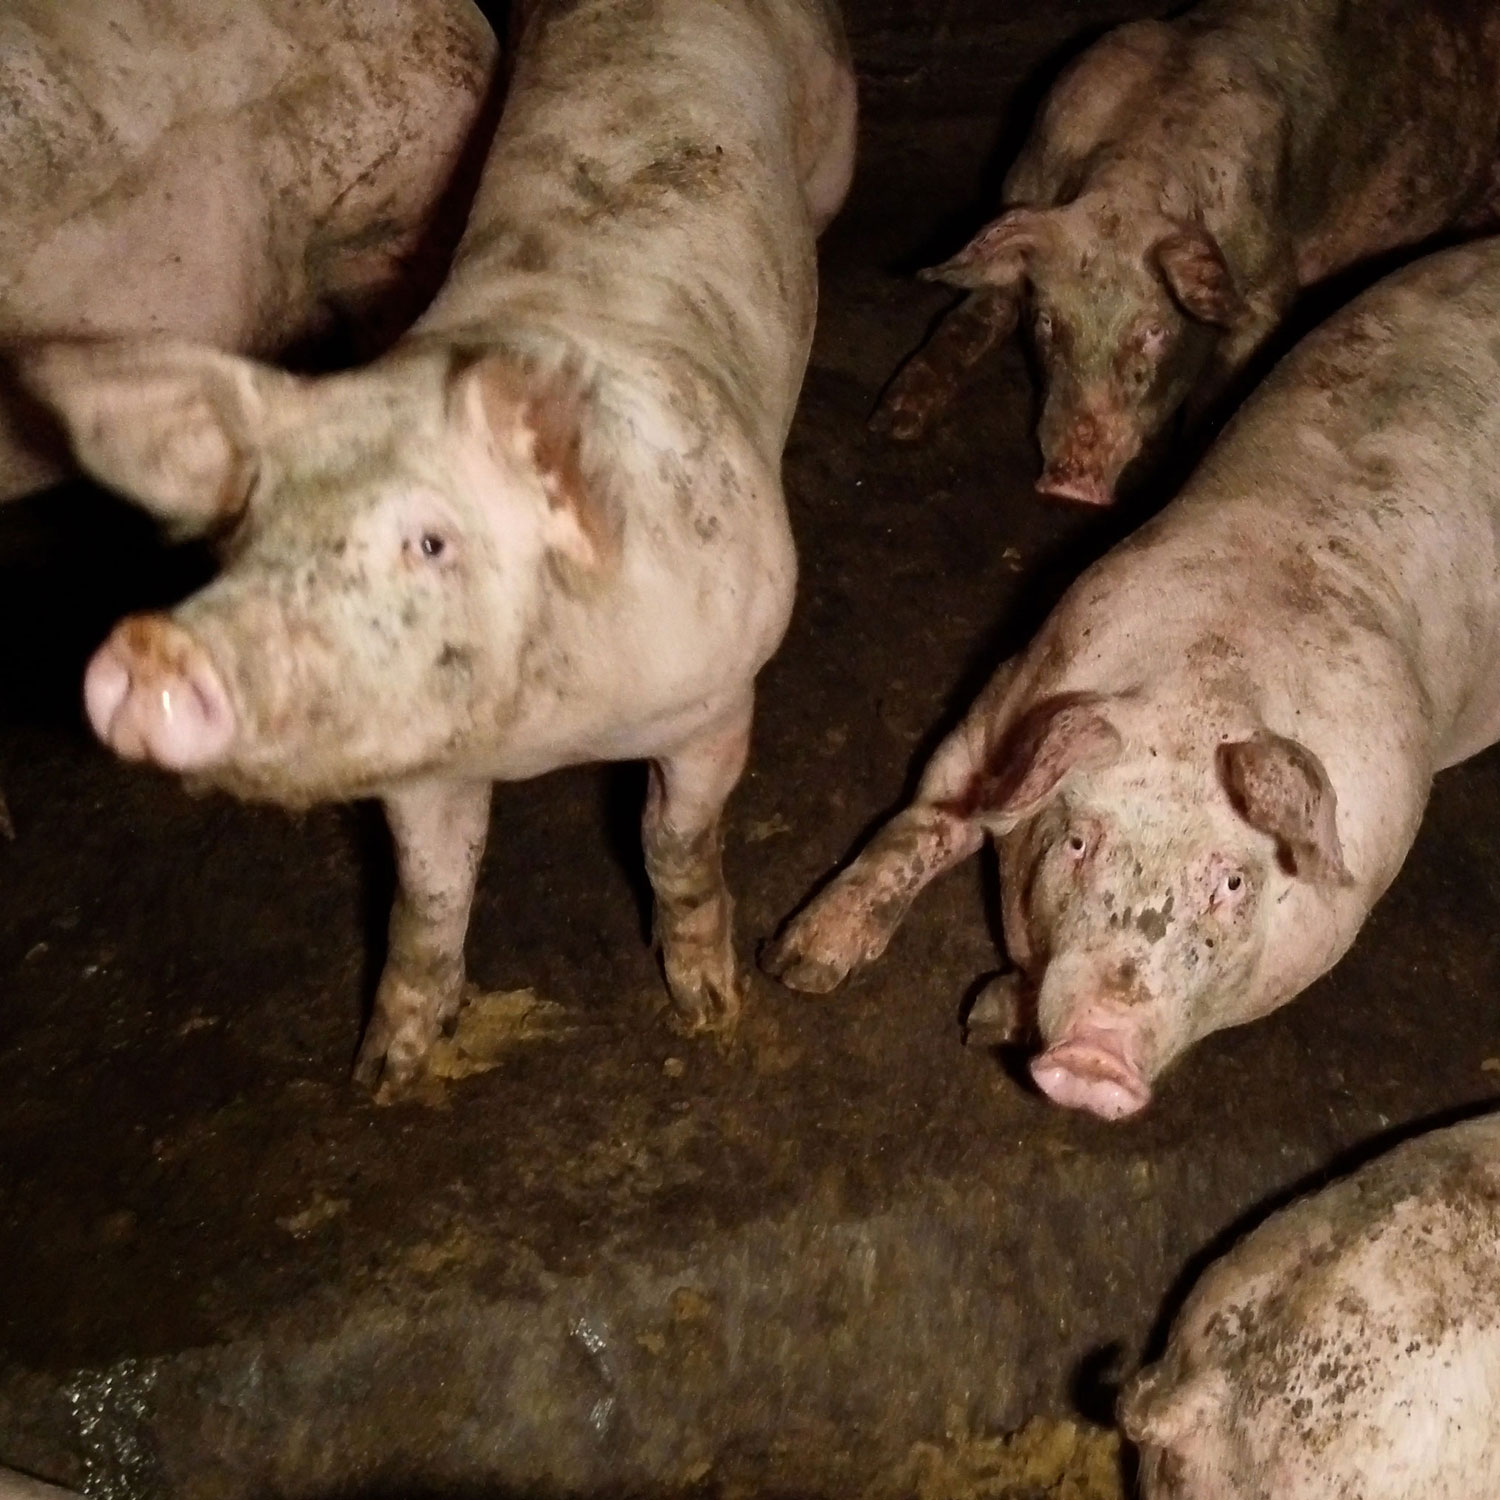 Pigs in a dirty factory farm